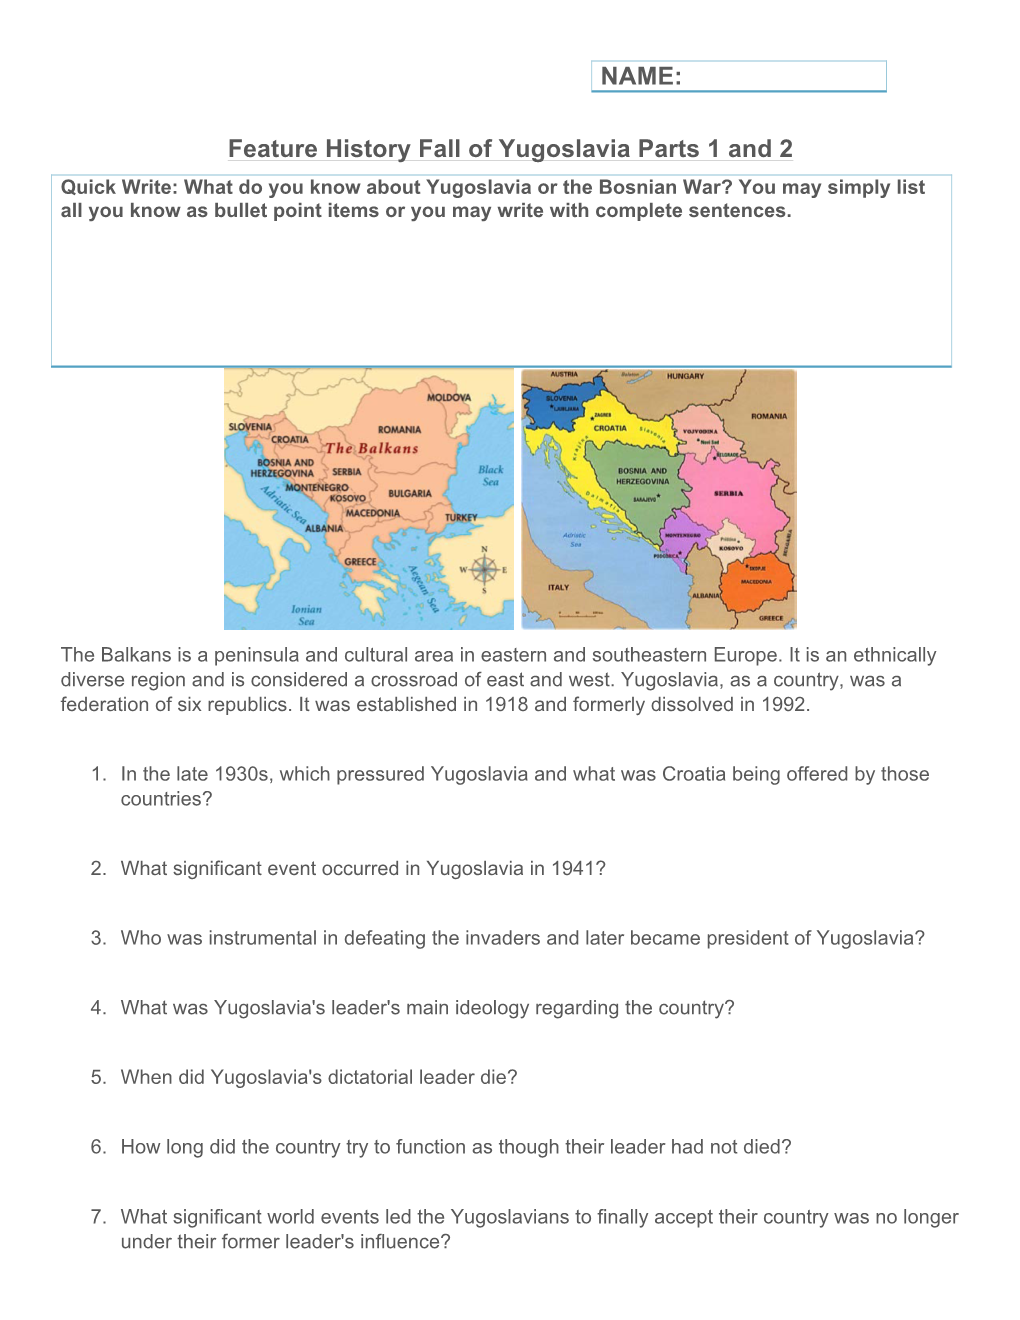 Feature History Fall of Yugoslavia Parts 1 and 2